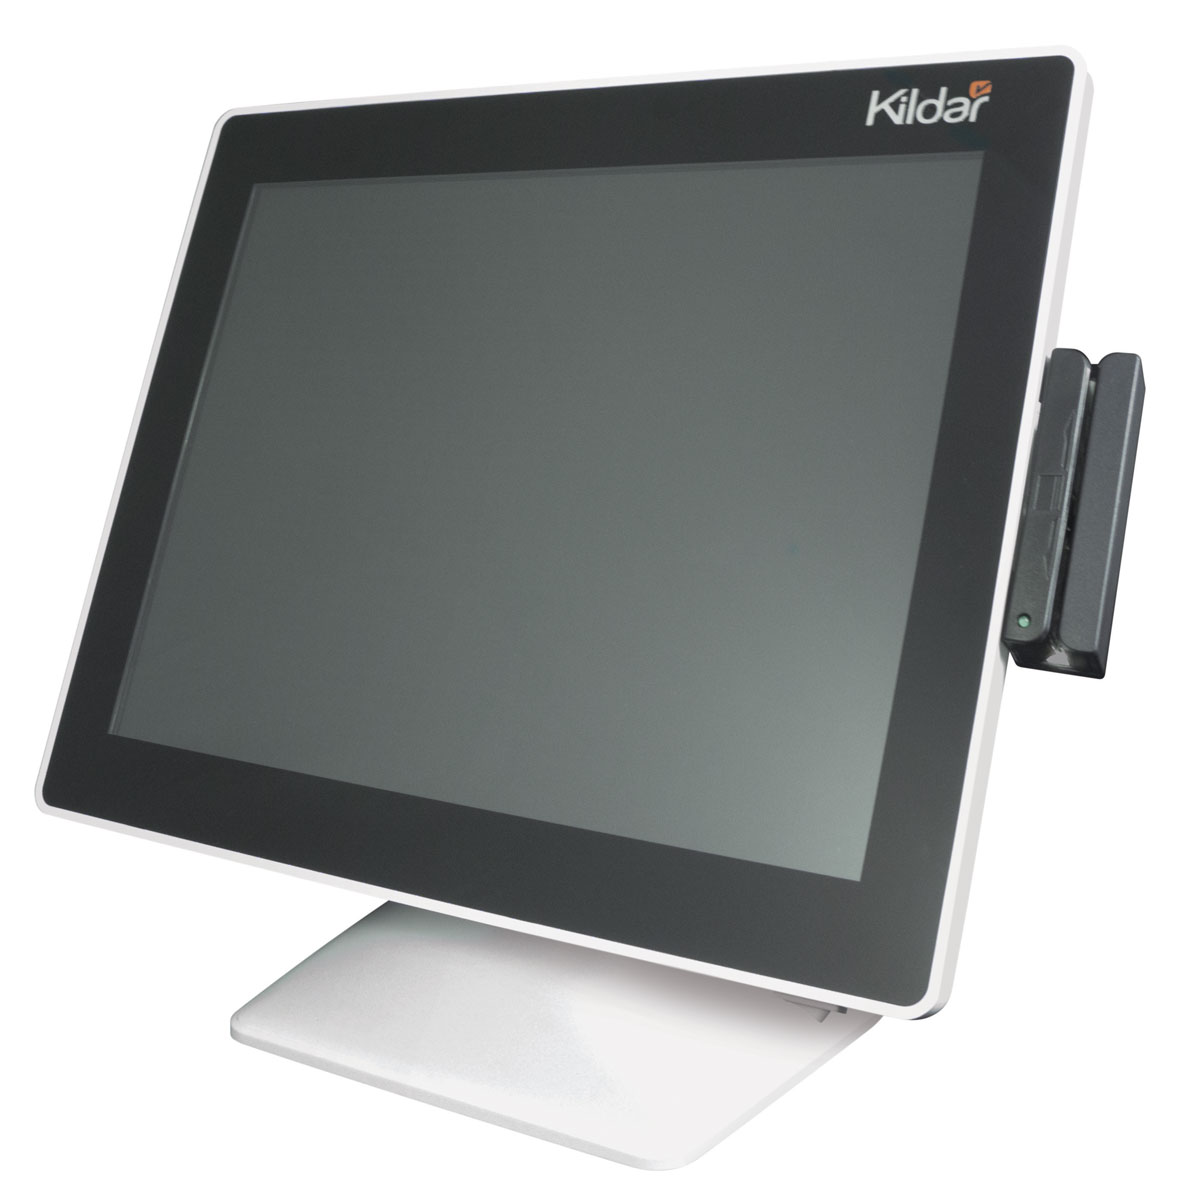 KILDAR - POS Touch Screen Terminals - DataTouch T1580 -Front